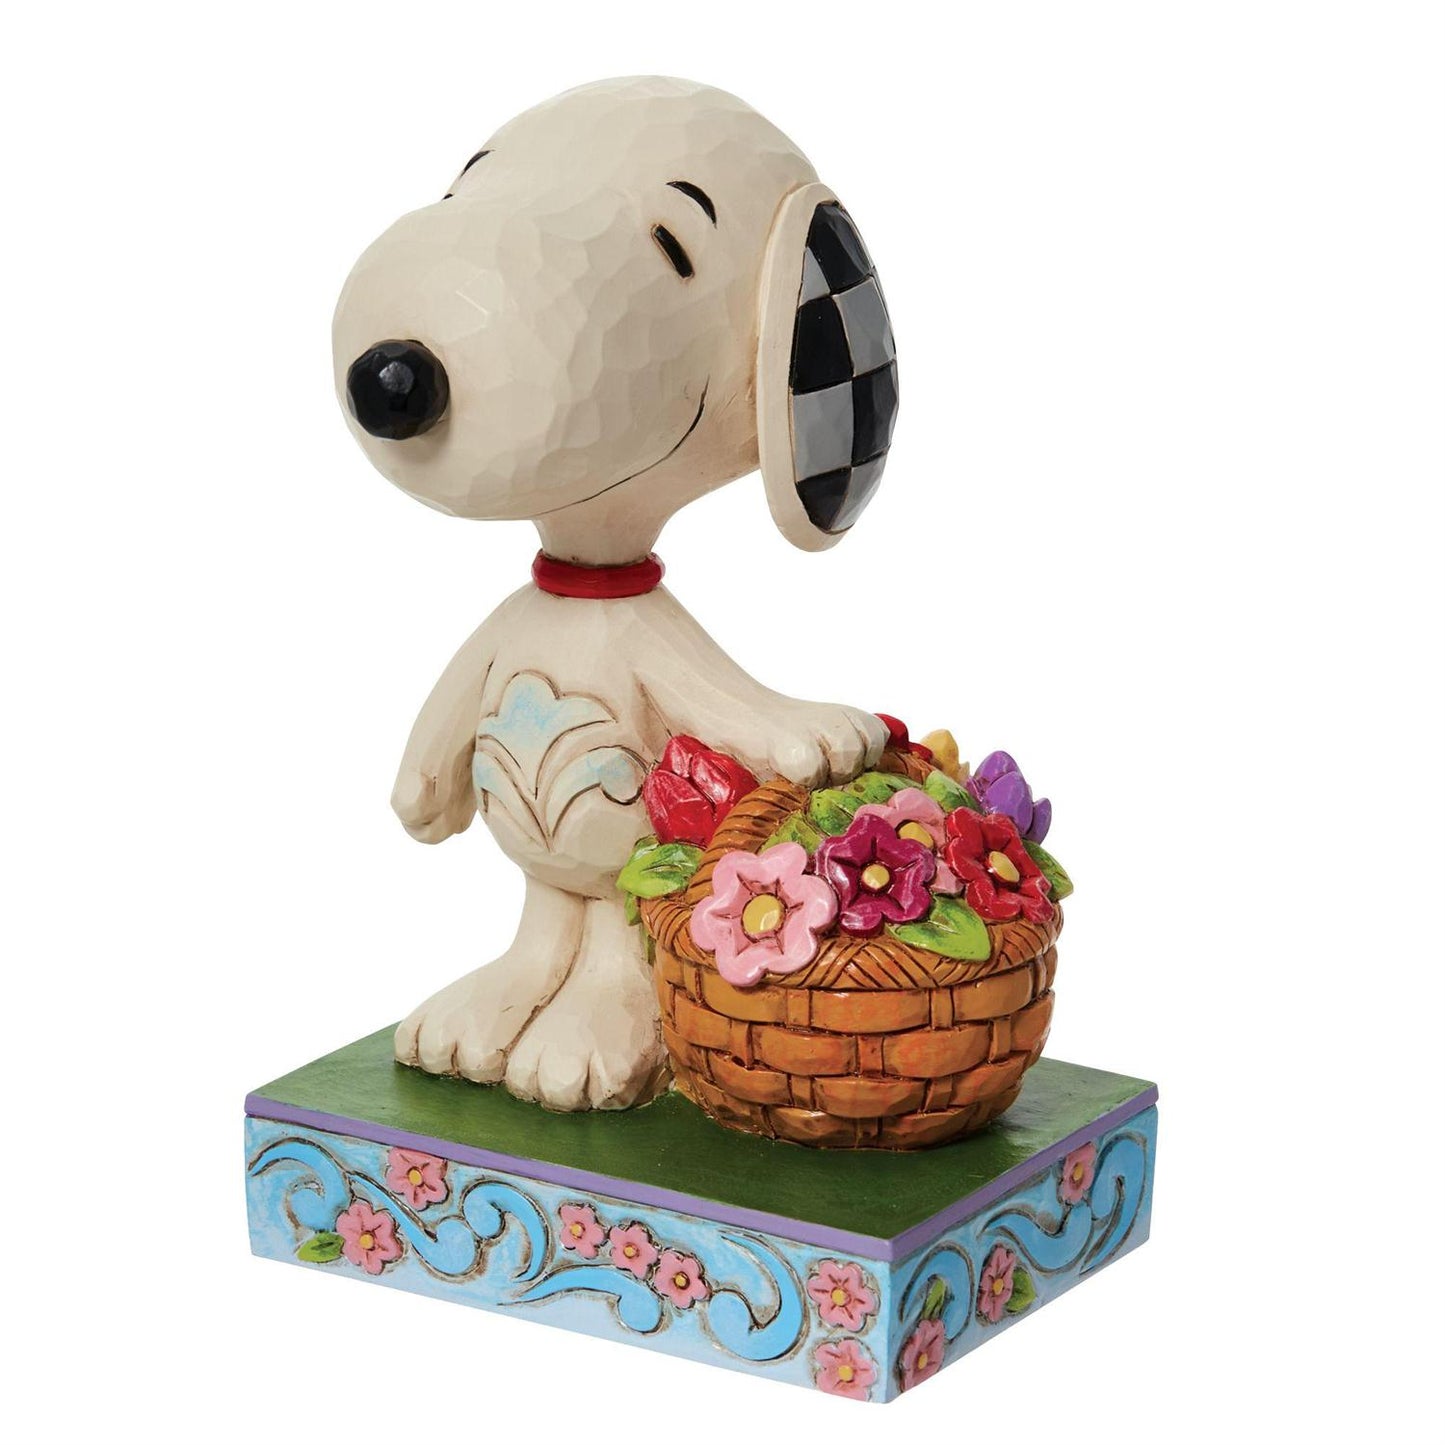 Jim Shore Peanuts Snoopy Happiness is a Basket of Blooms